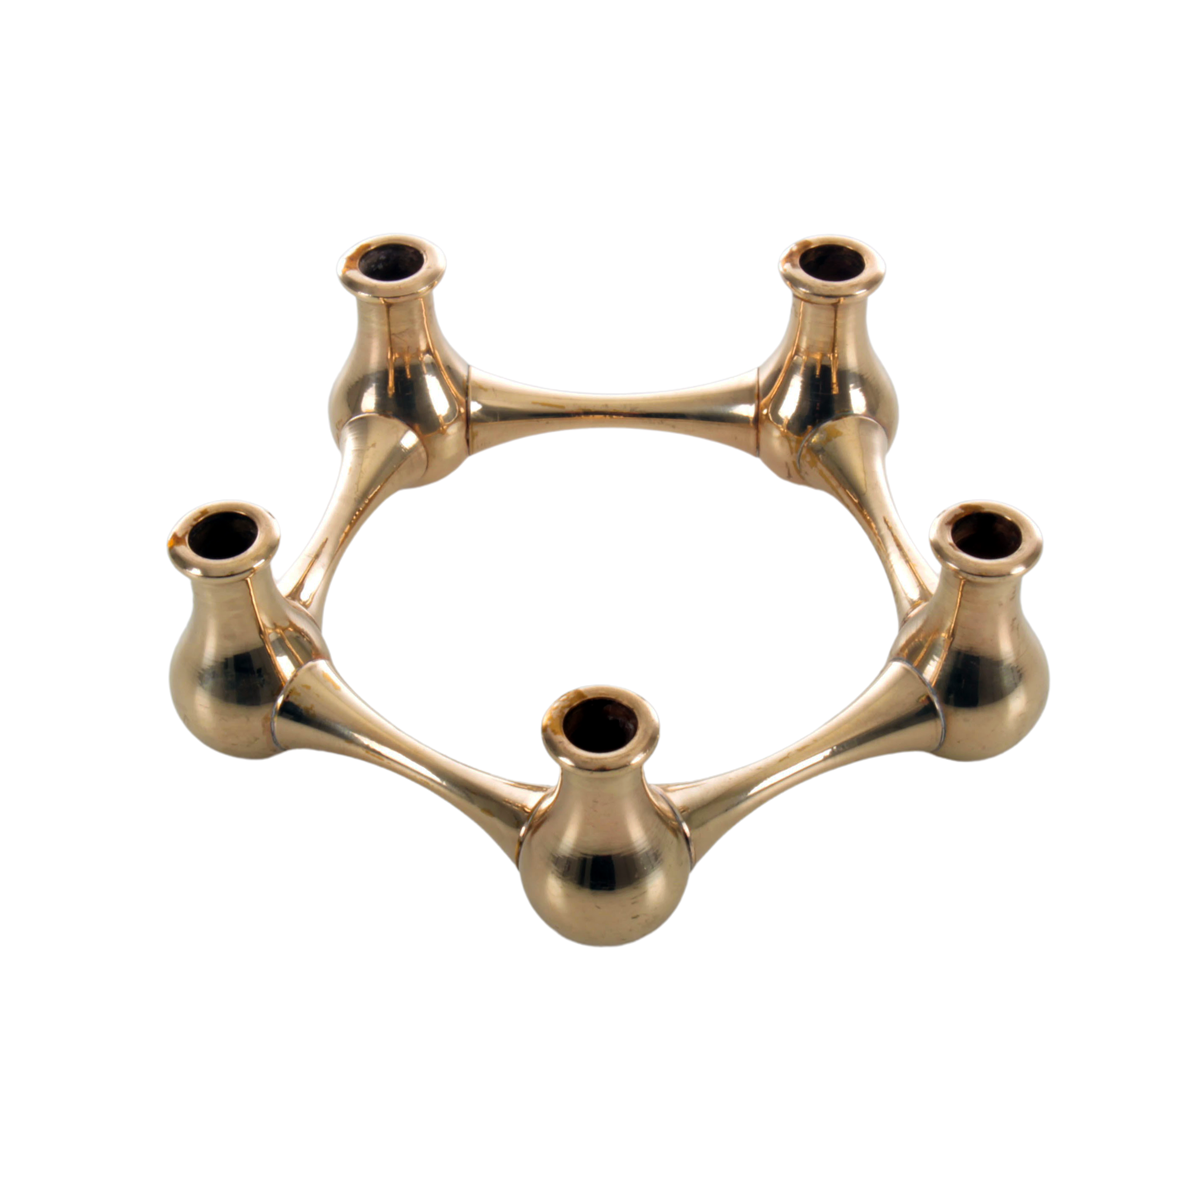 https://tinytapers.com/wp-content/uploads/2020/12/dansk-designs-ihq-brass-ring5-tinytaper-candleholder-1-1.png